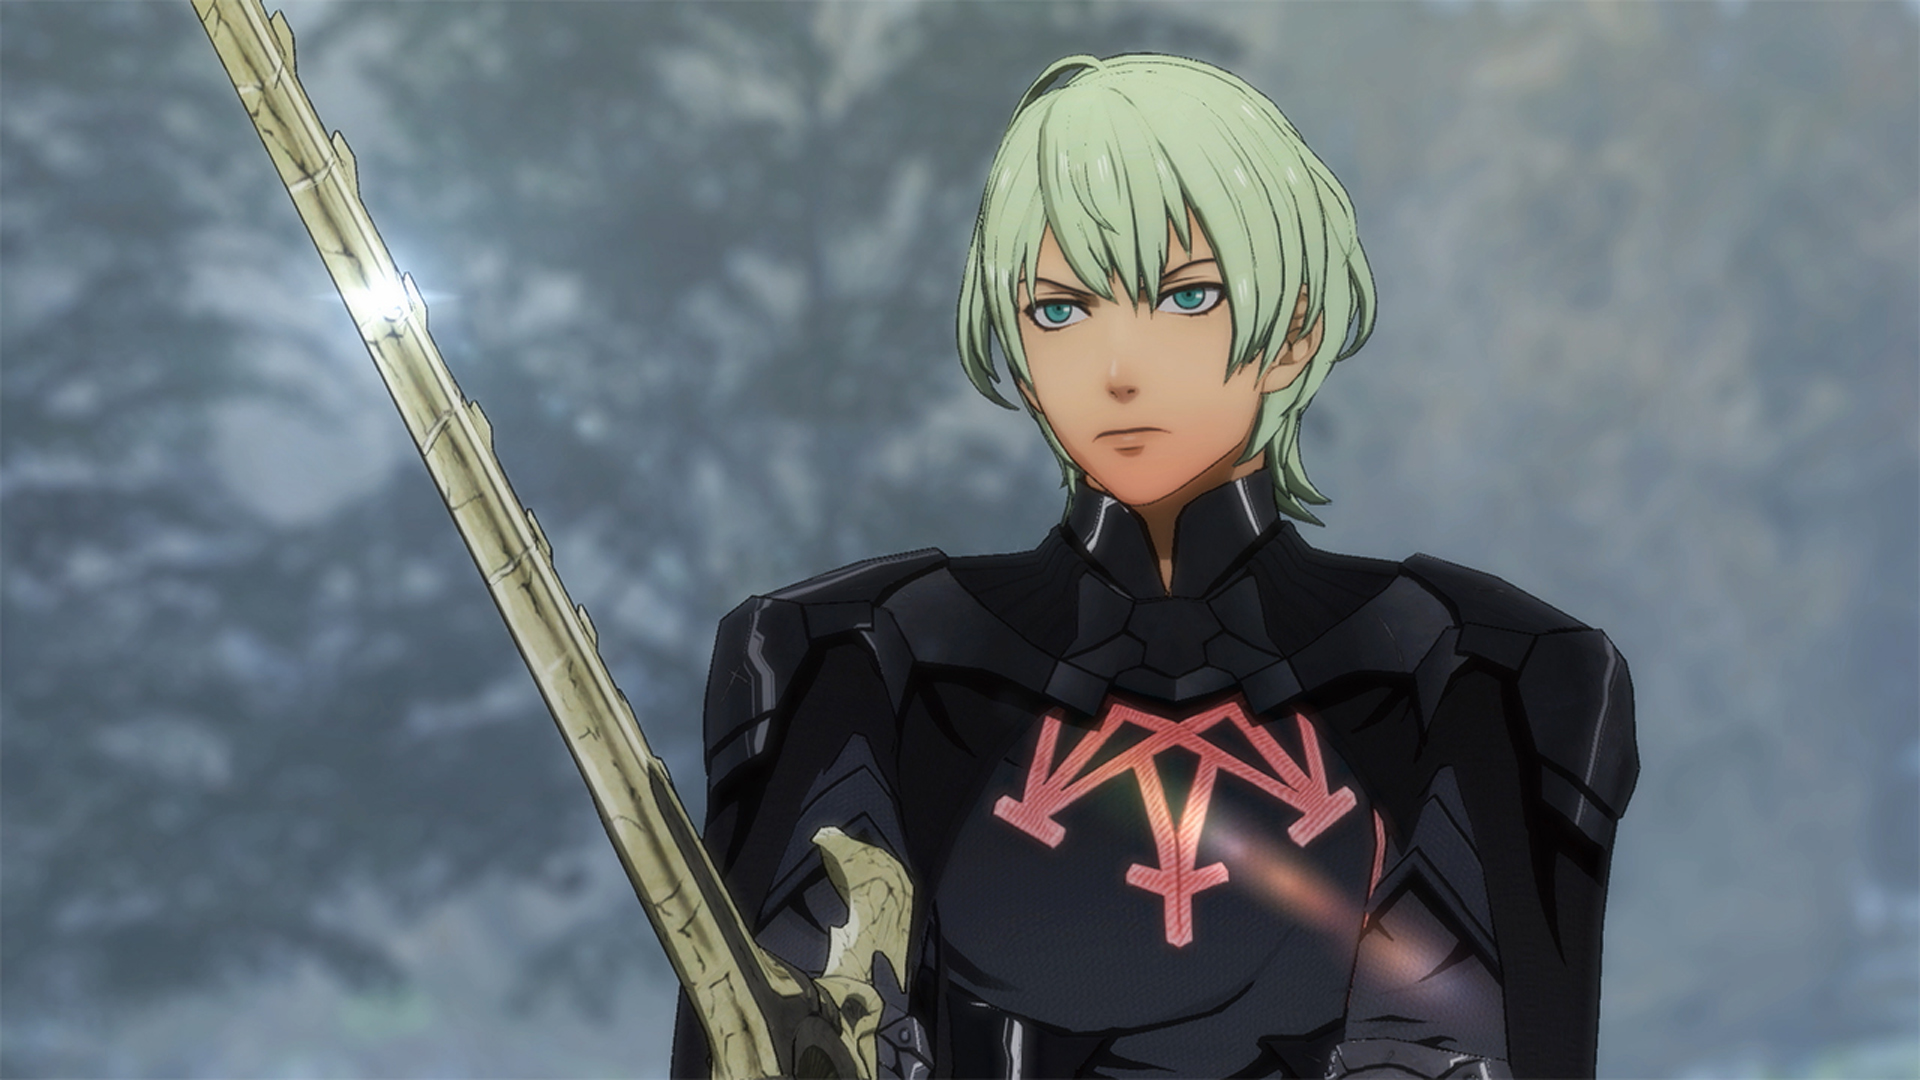 Fire Emblem: Three Houses New Game Plus guide